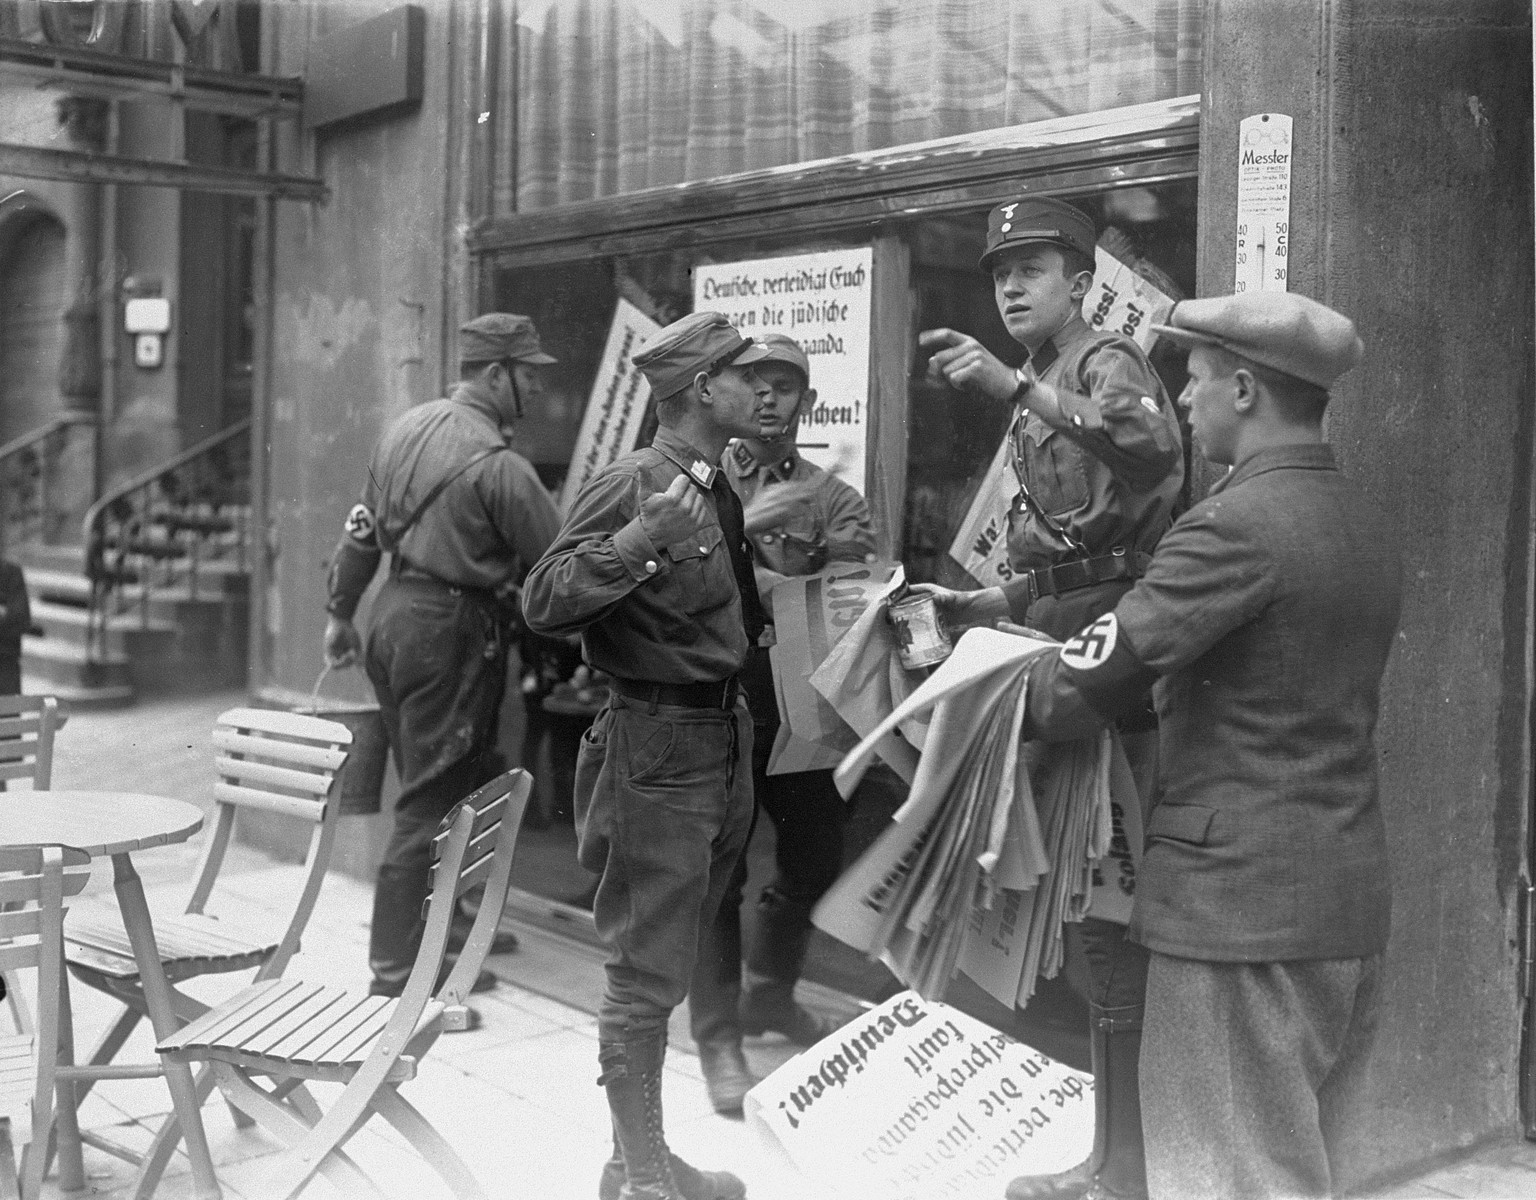 An SA member instructs others where to post anti-Jewish boycott signs on a commercial street in Germany.  

A German civilian wearing a Nazi armband holds a sheaf of anti-Jewish boycott signs, while SA members paste them on a Jewish-owned business.  Most of the signs read, "Germans defend yourselves against Jewish atrocity propaganda/Buy only at German stores."